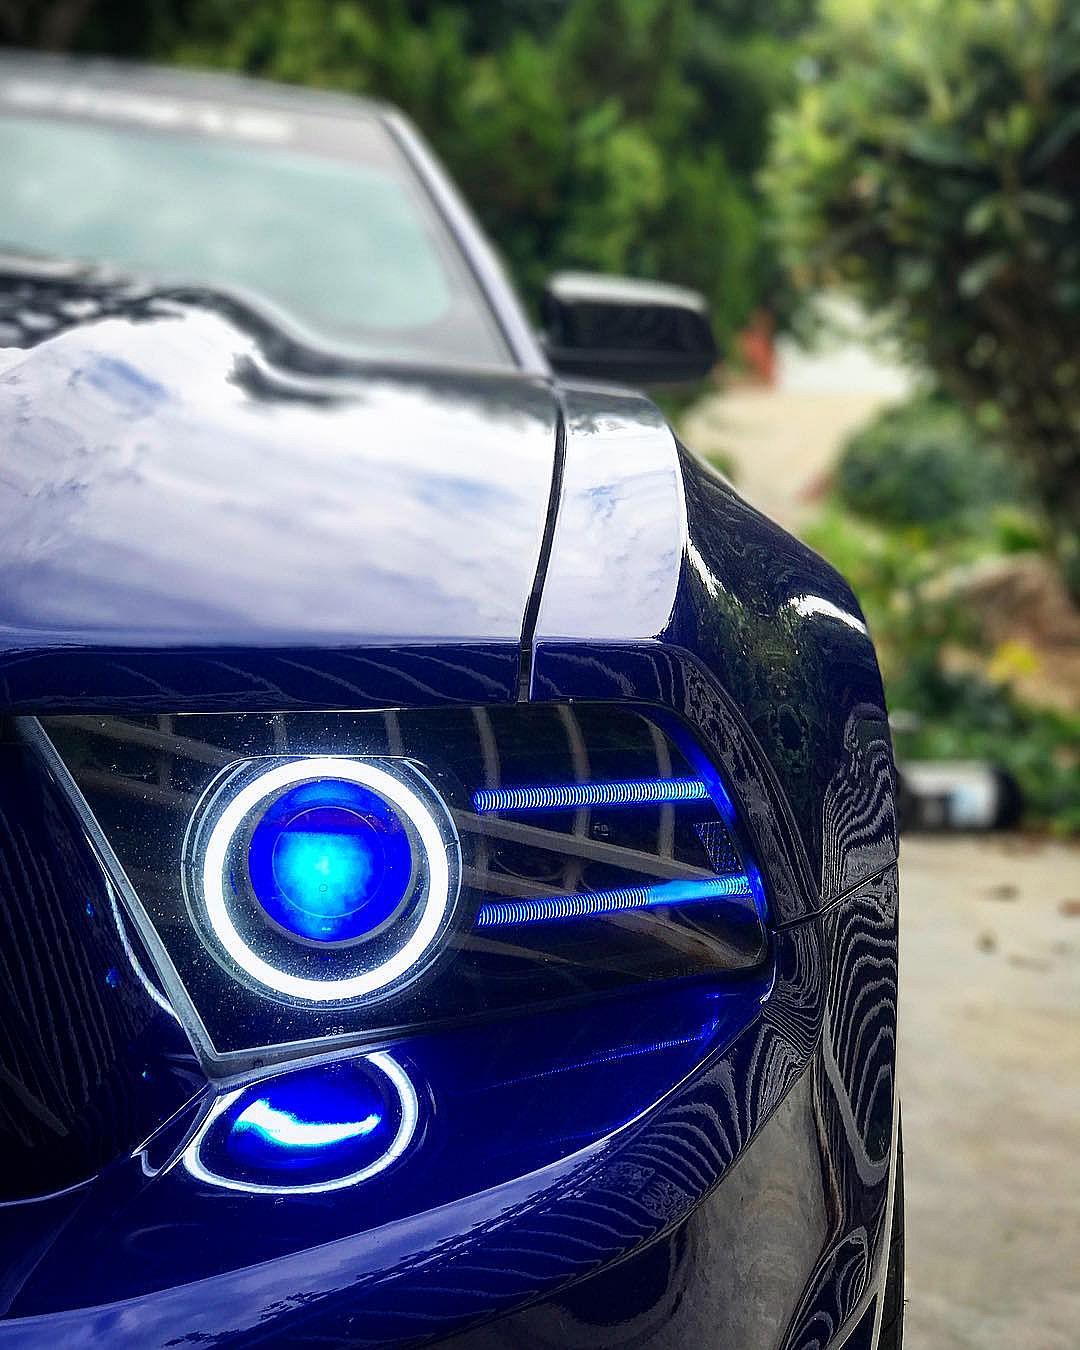 Ford%20Mustang%20DRL%20LED%20Boards%20white%20HD%20Halos%20owner%20ig%20@_markyoung_.jpg